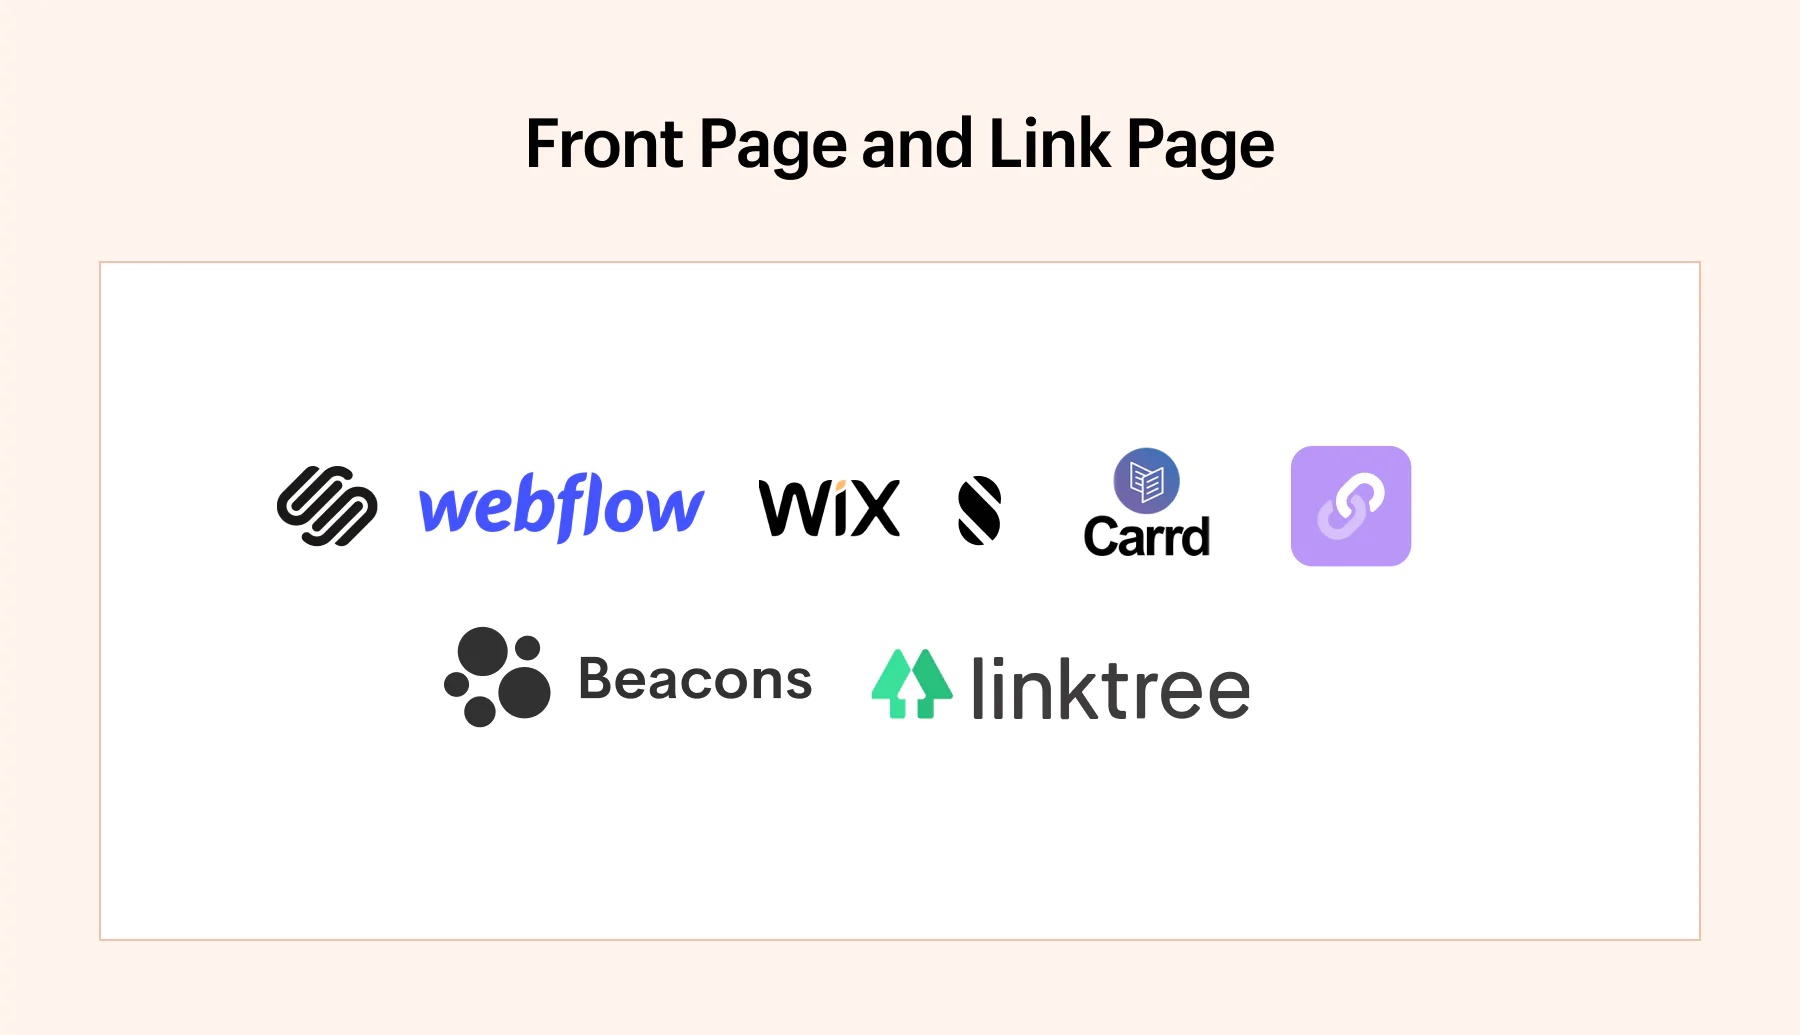 Chart showing logos of popular front page and link page tools